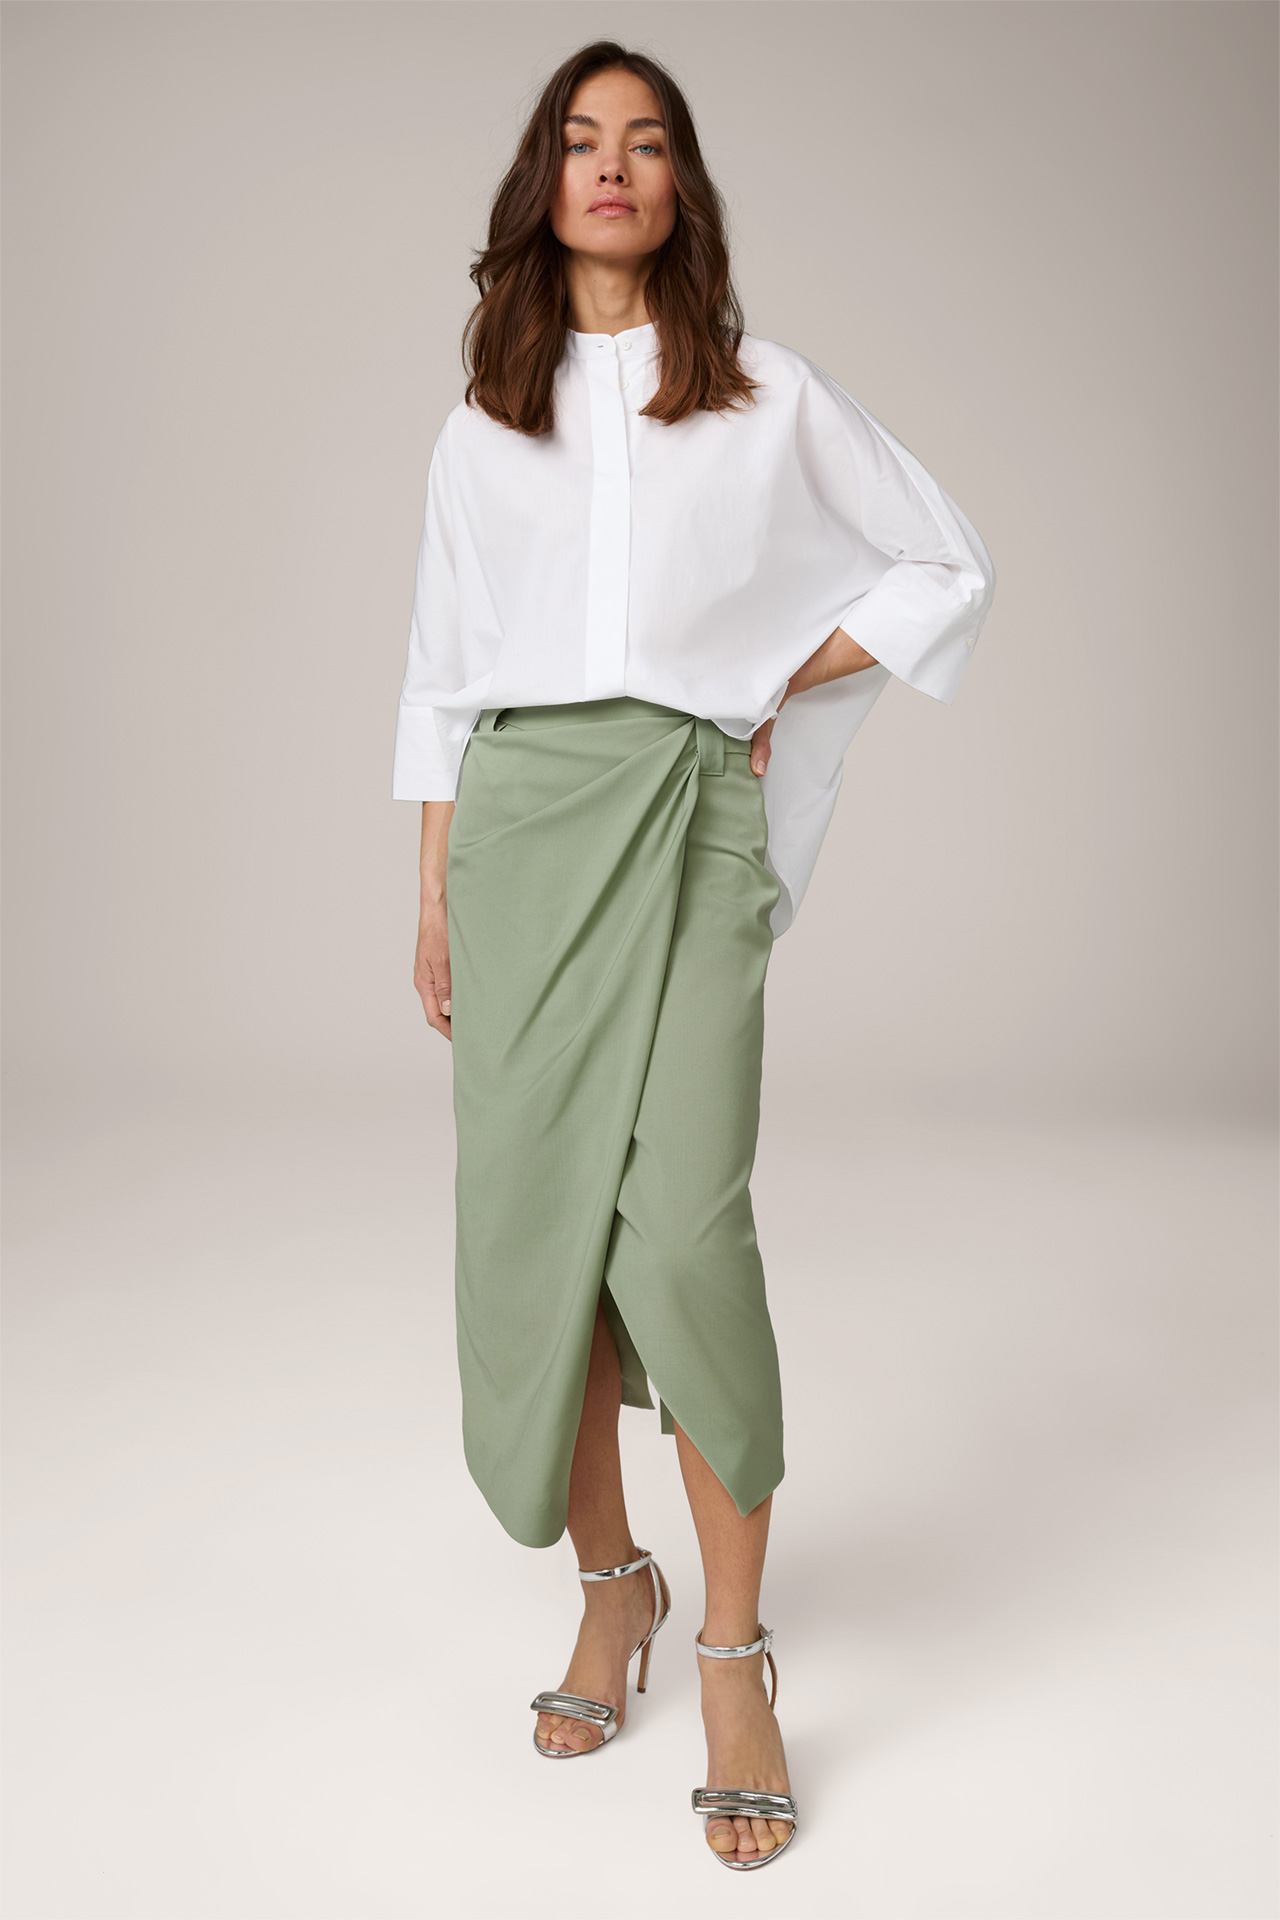 Virgin Wool Midi Skirt with Wrapover Detail in Sage